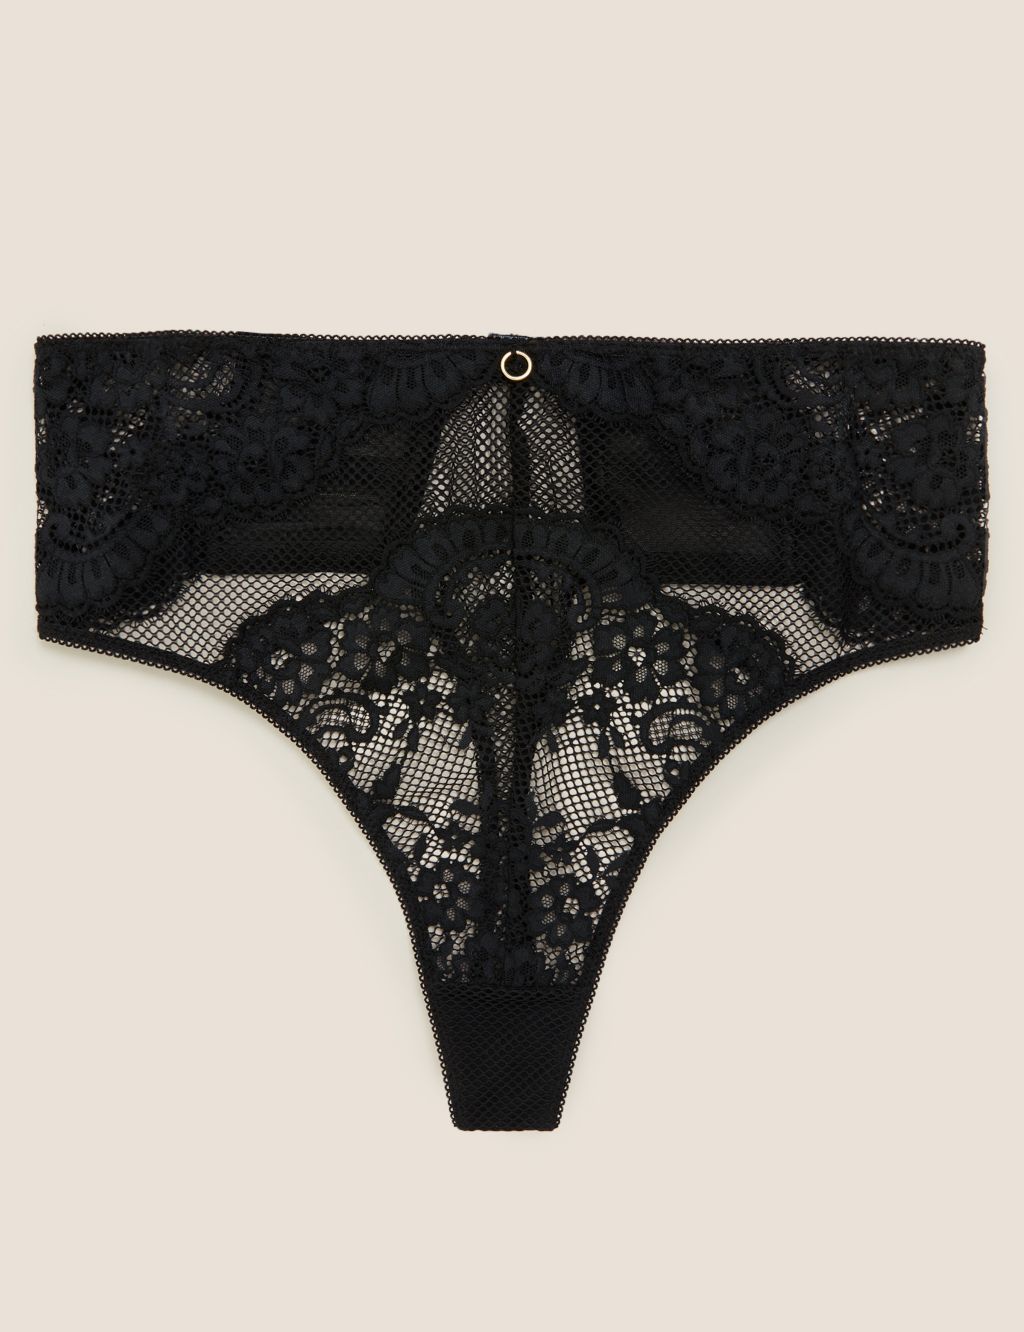 https://asset1.cxnmarksandspencer.com/is/image/mands/All-Over-Lace-High-Waisted-Thong/SD_02_T61_5847_Y0_X_EC_90?$PDP_IMAGEGRID$&wid=1024&qlt=80